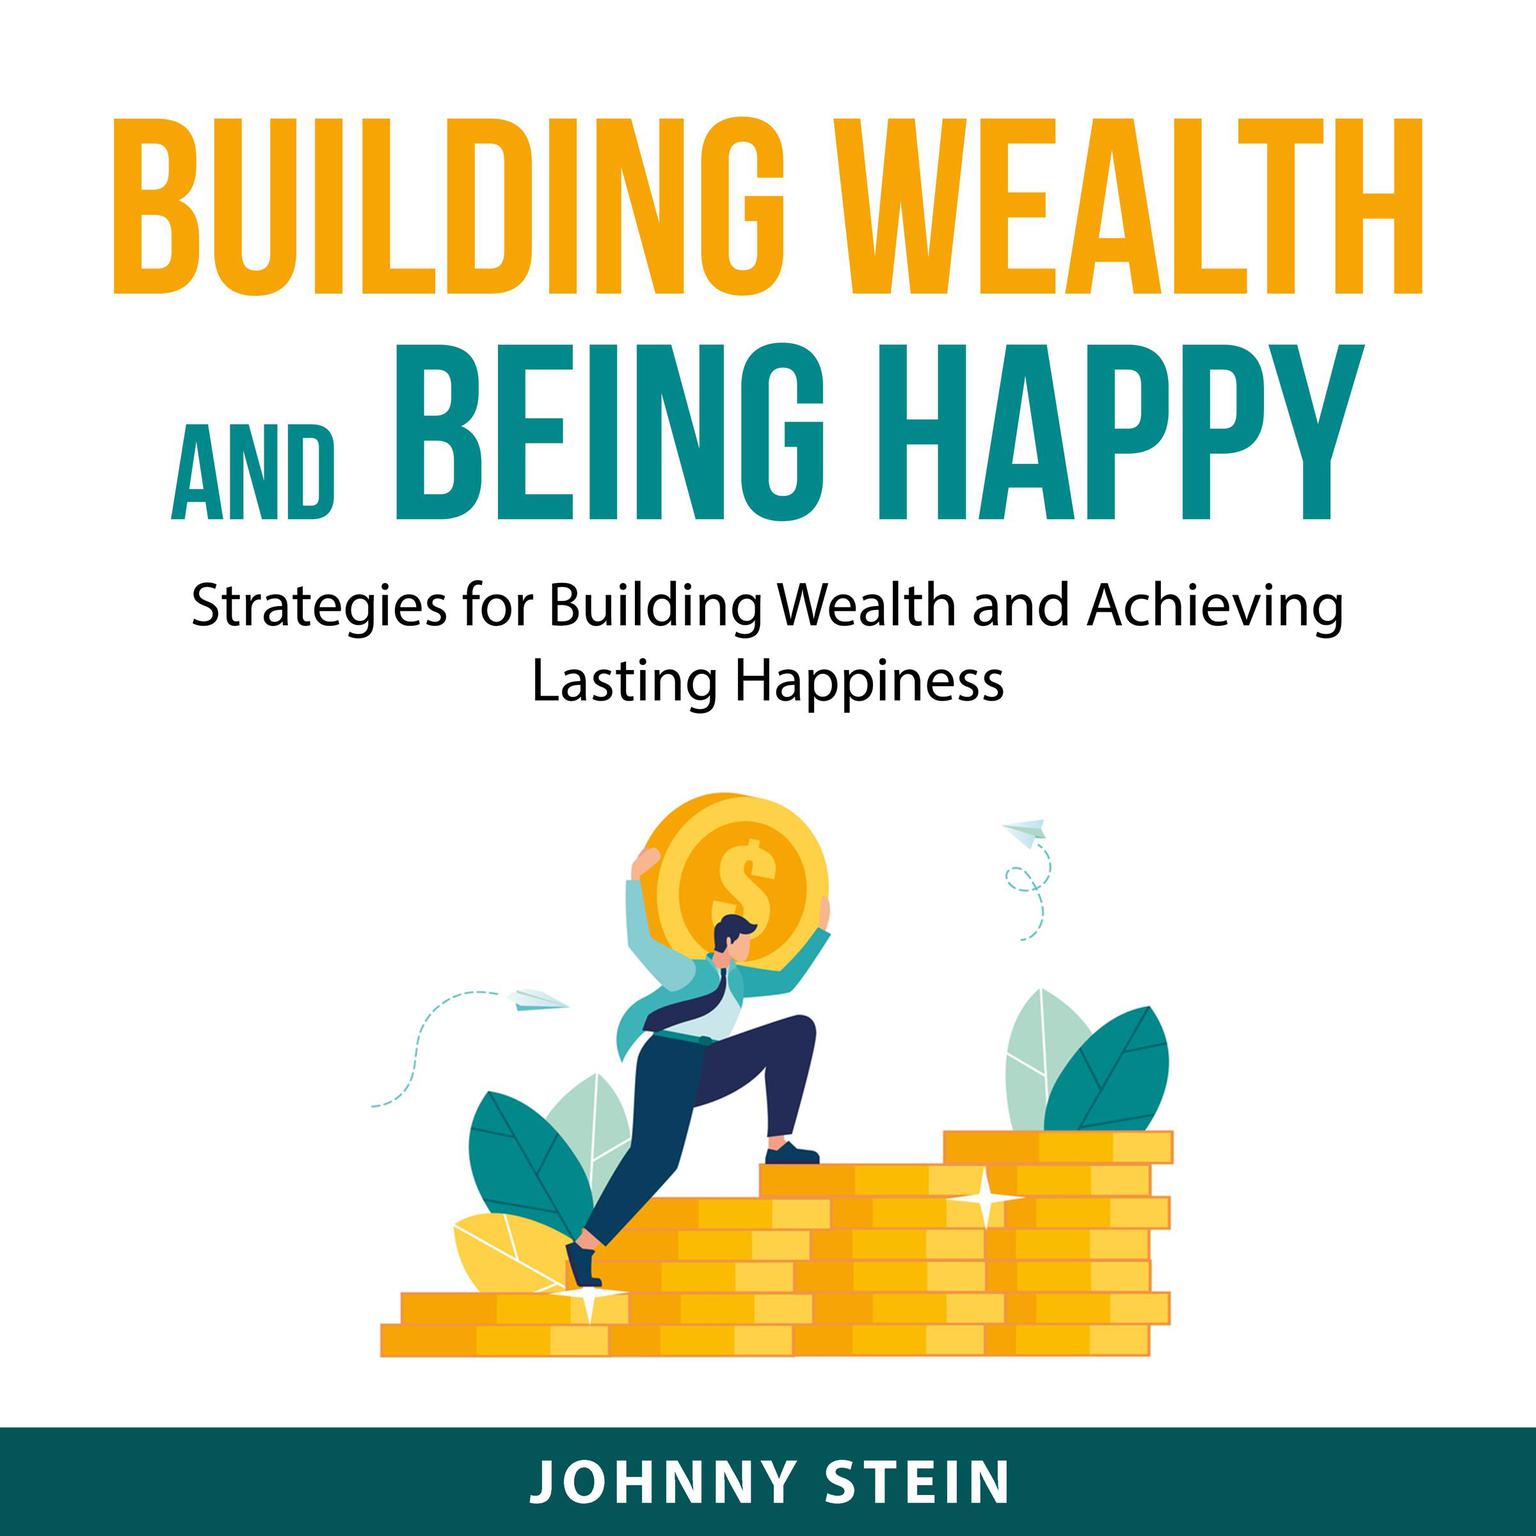 Building Wealth And Being Happy: Strategies for Building Wealth and Achieving Lasting Happiness Audiobook, by Johnny Stein